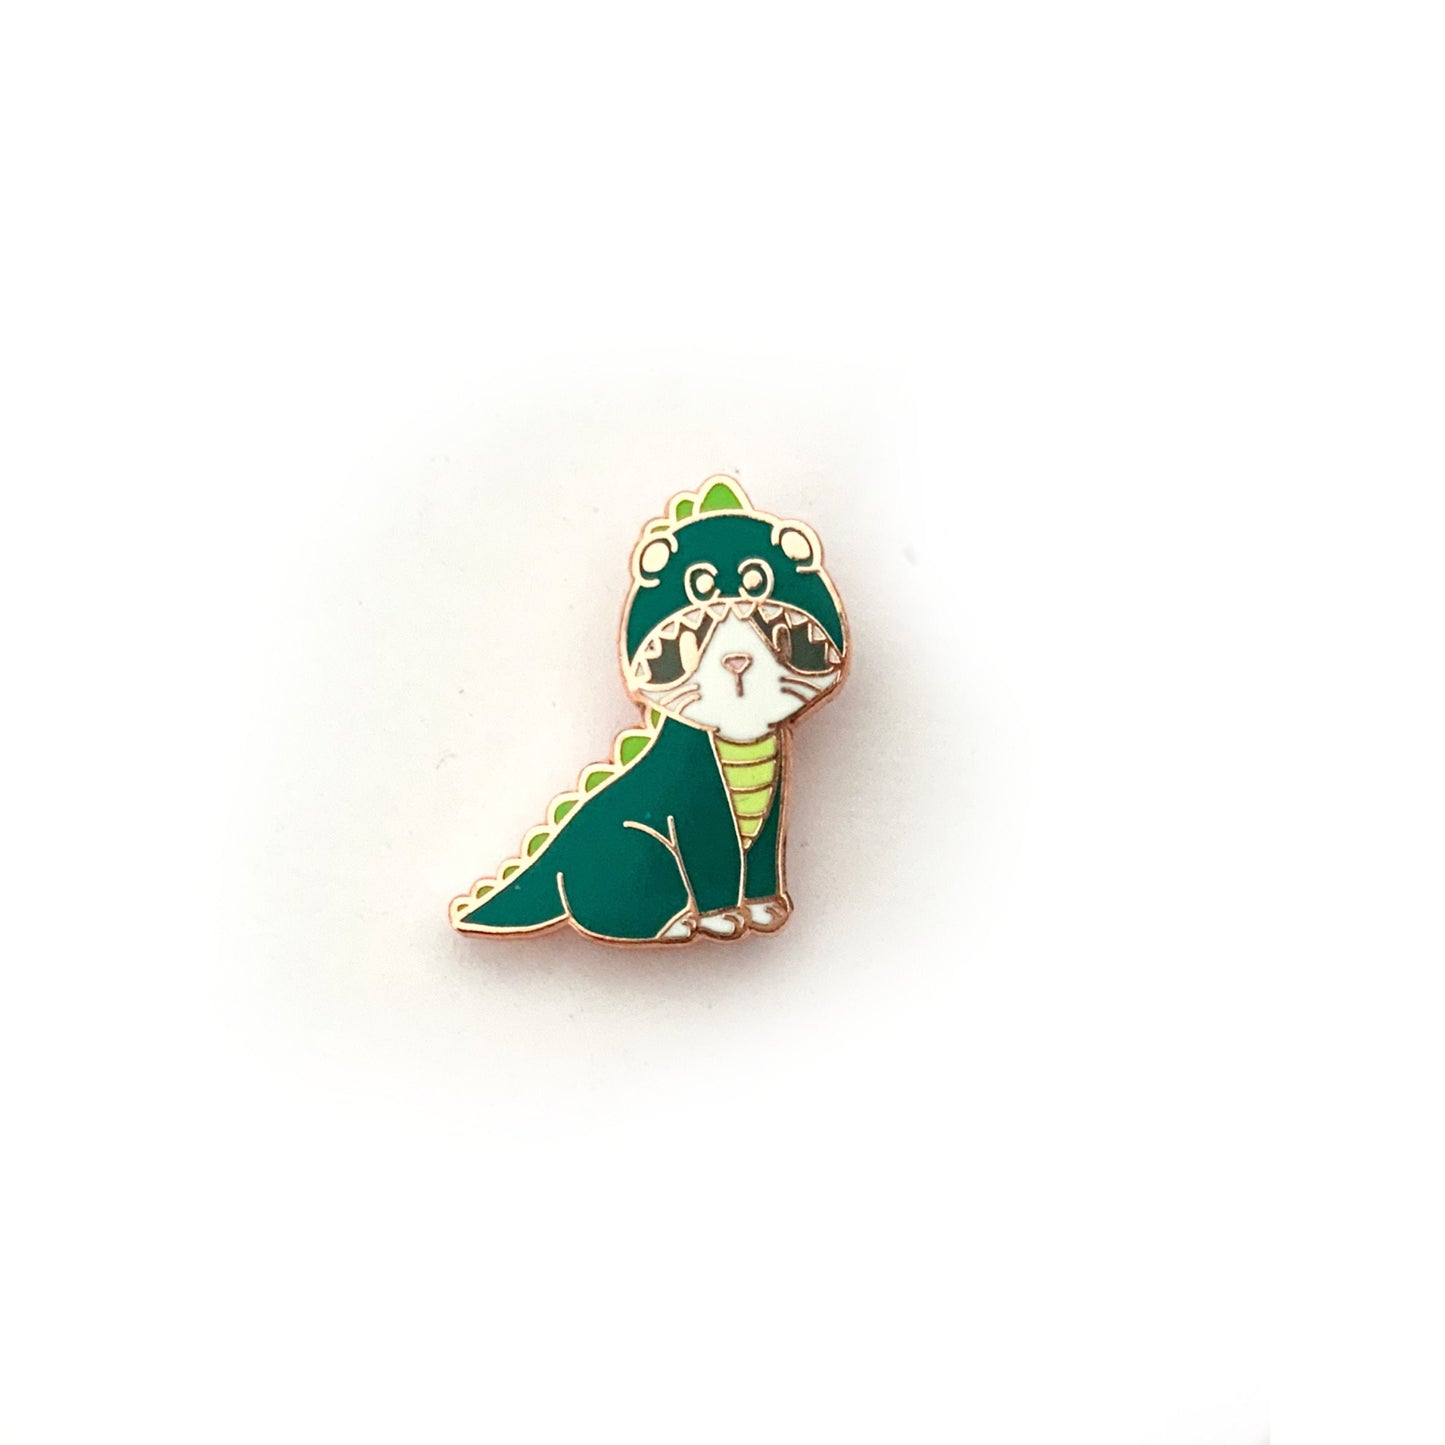 Kitty in Dino Suit/Costume - Small Enamel Pin, Pins, Brooches & Lapel Pins